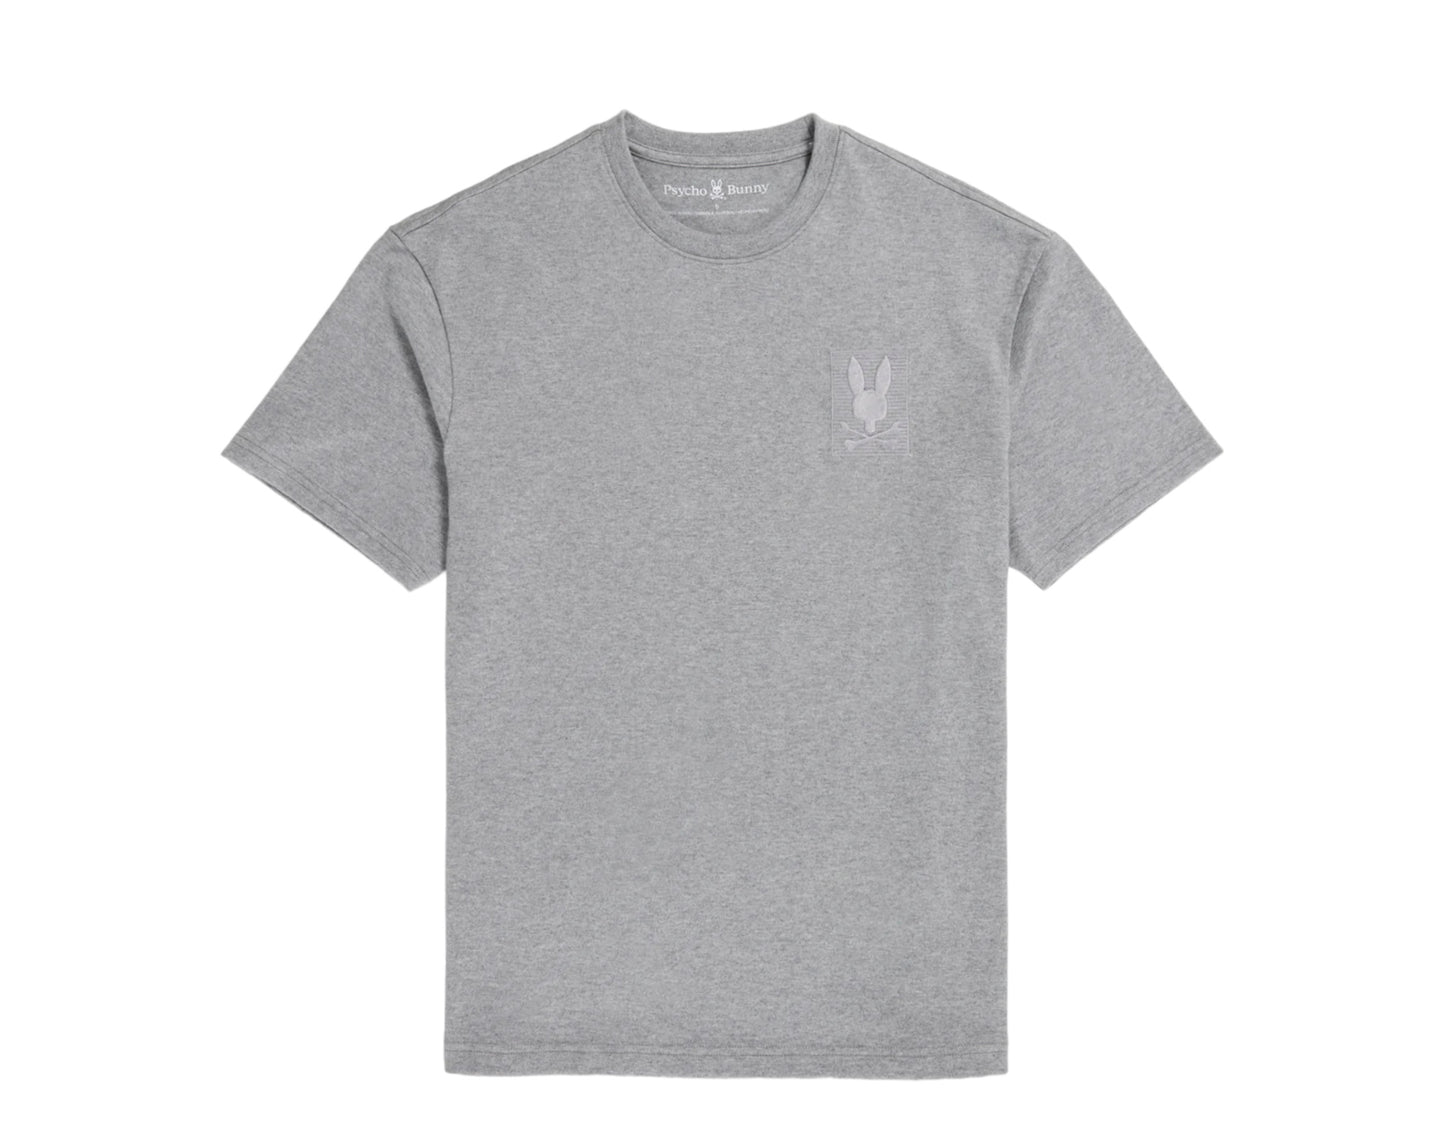 Psycho Bunny Yorkville Heavy Weight Men's Relaxed Fit Tee Shirt